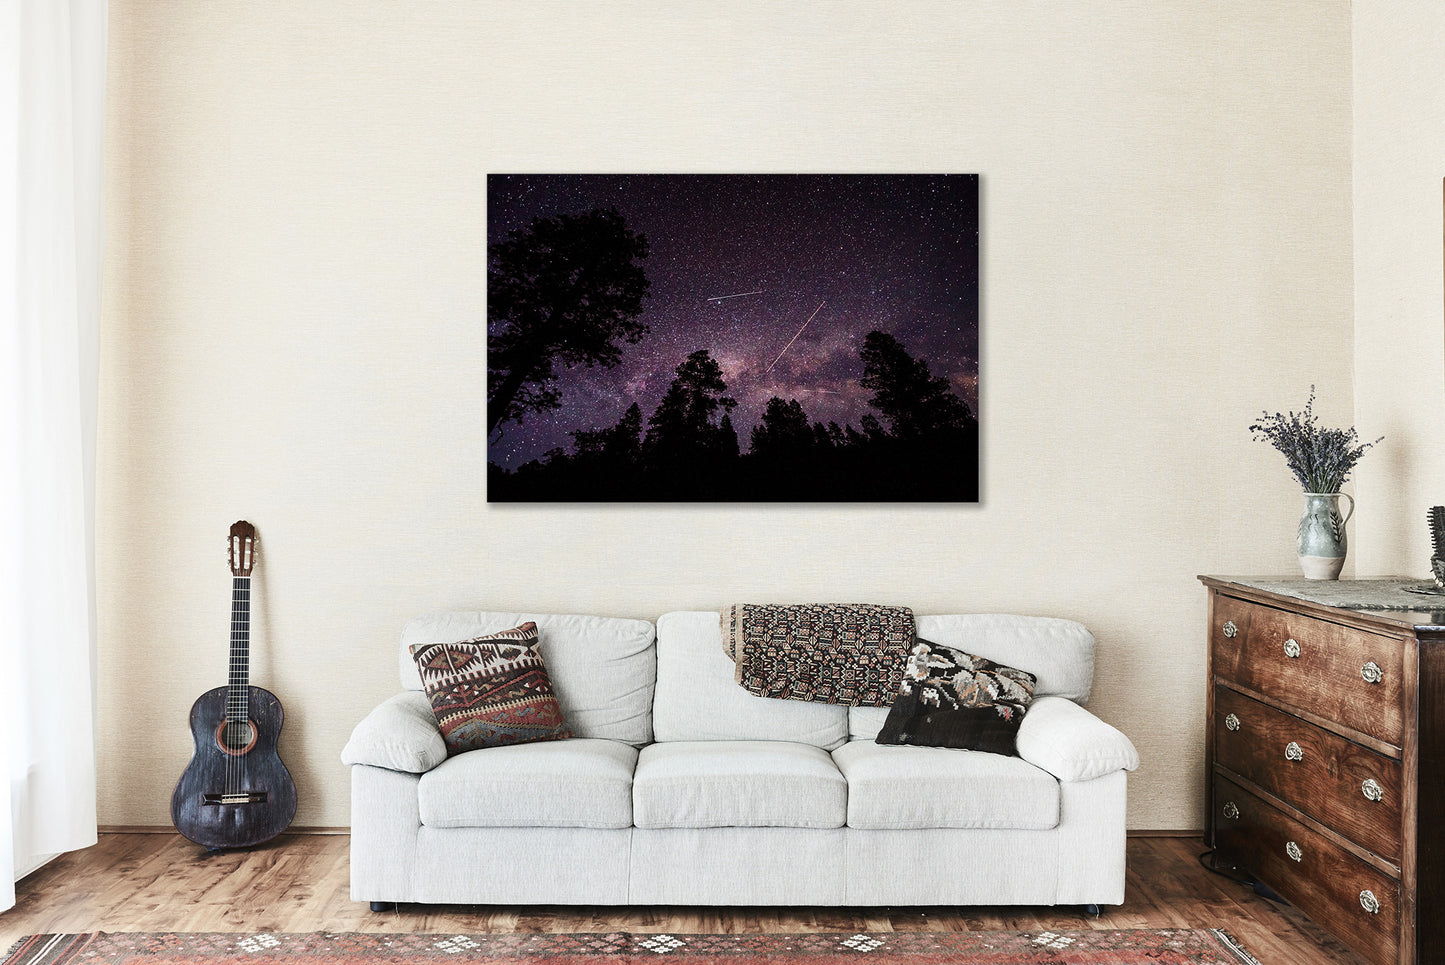 Canvas Wall Art - Gallery Wrap of Shooting Stars, Planes and Satellites in Colorado Night Sky - Celestial Photography Photo Artwork Decor